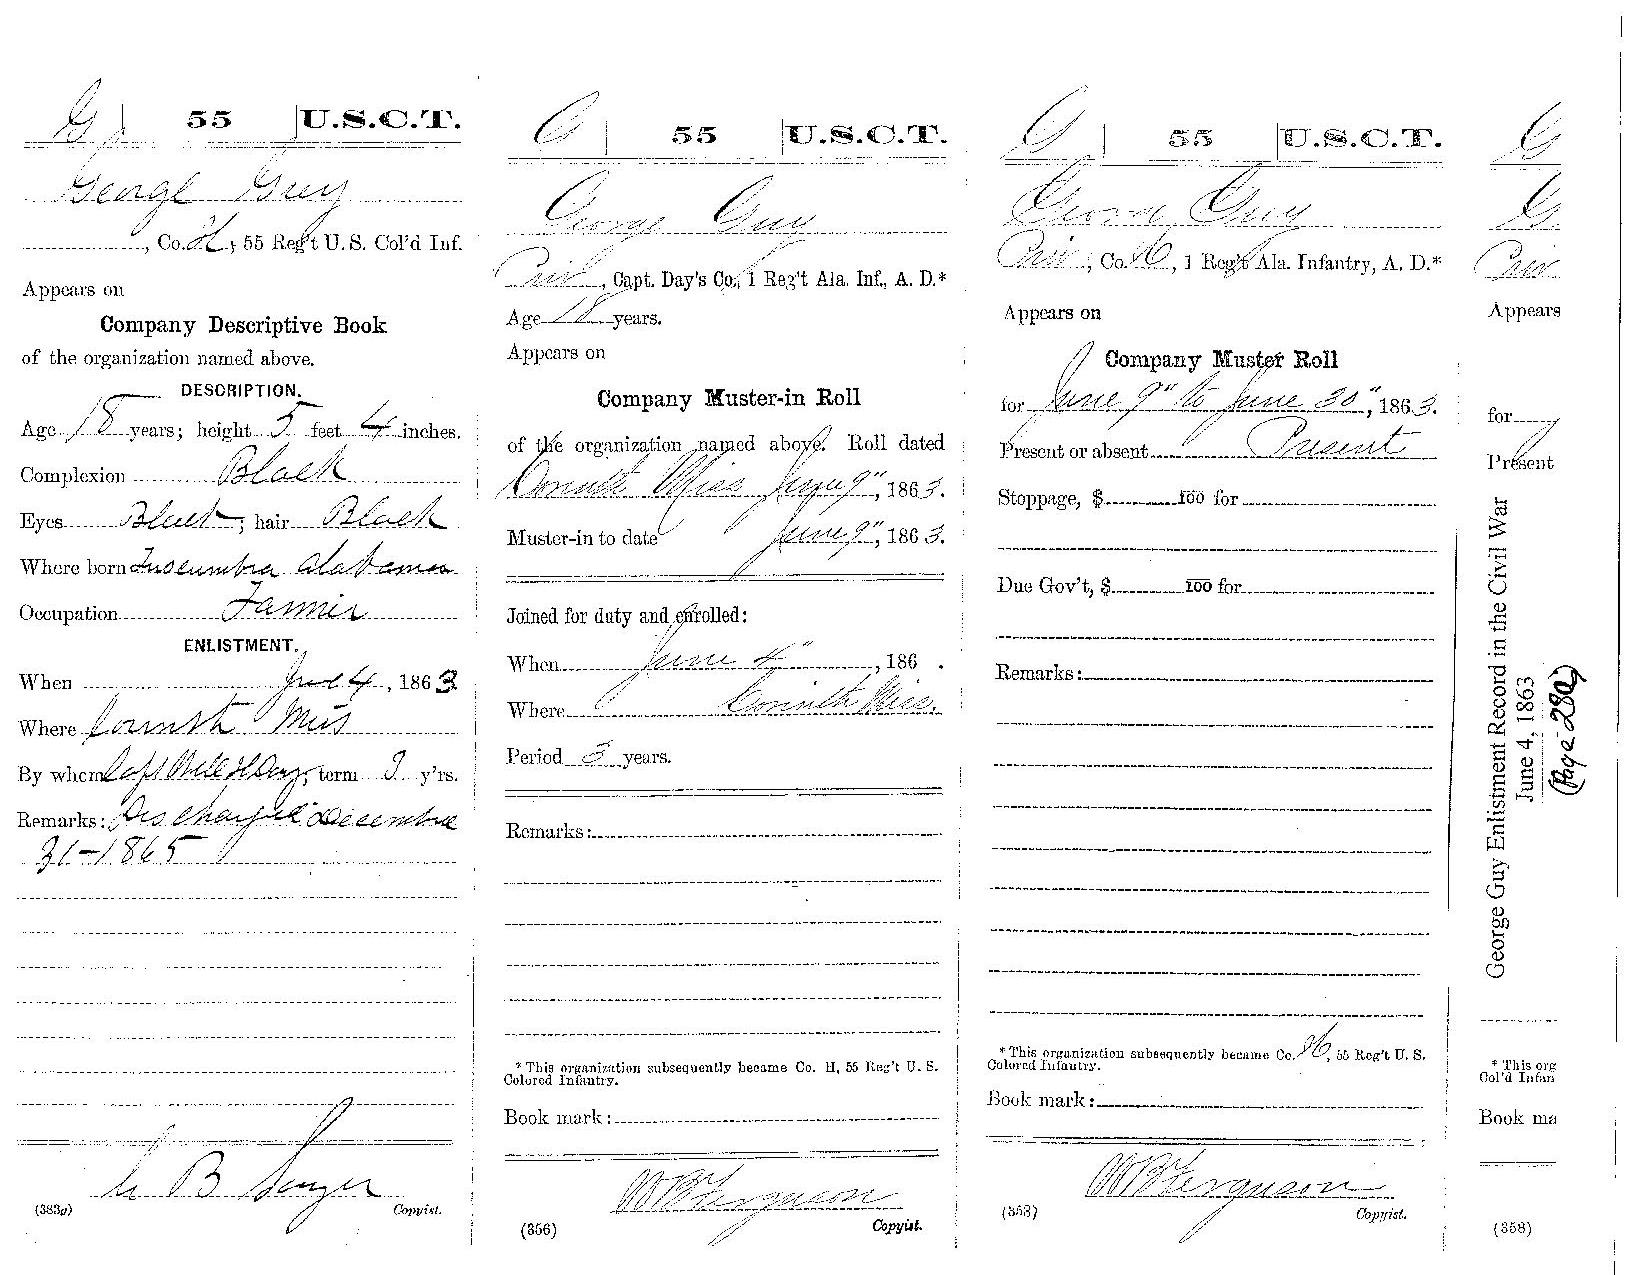 George Guy's Enlistment Record in the Civil War June 4, 1863